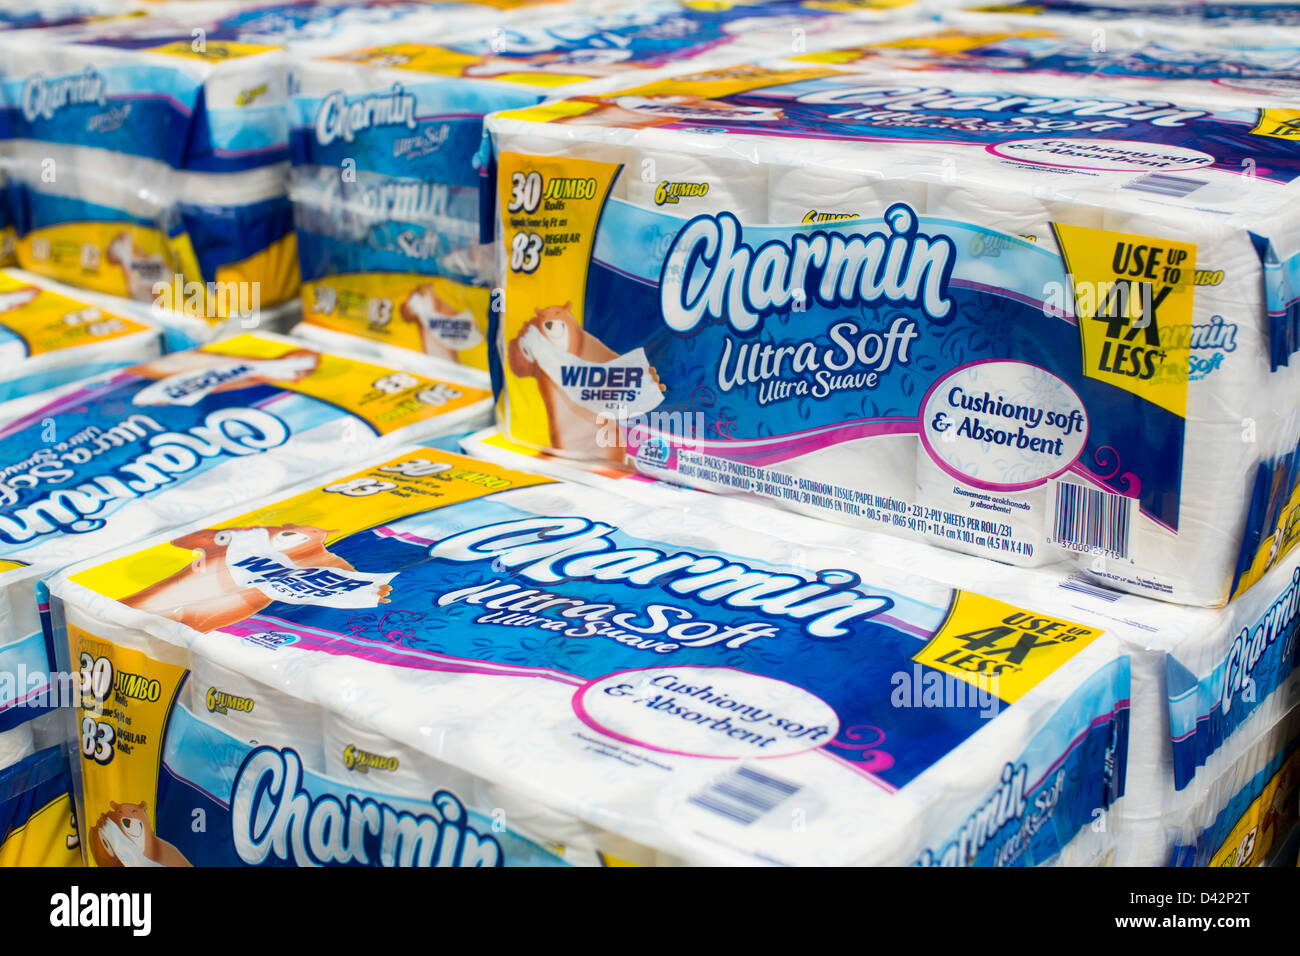 Charmin toilet paper on display at a Costco Wholesale Warehouse Club. Stock Photo